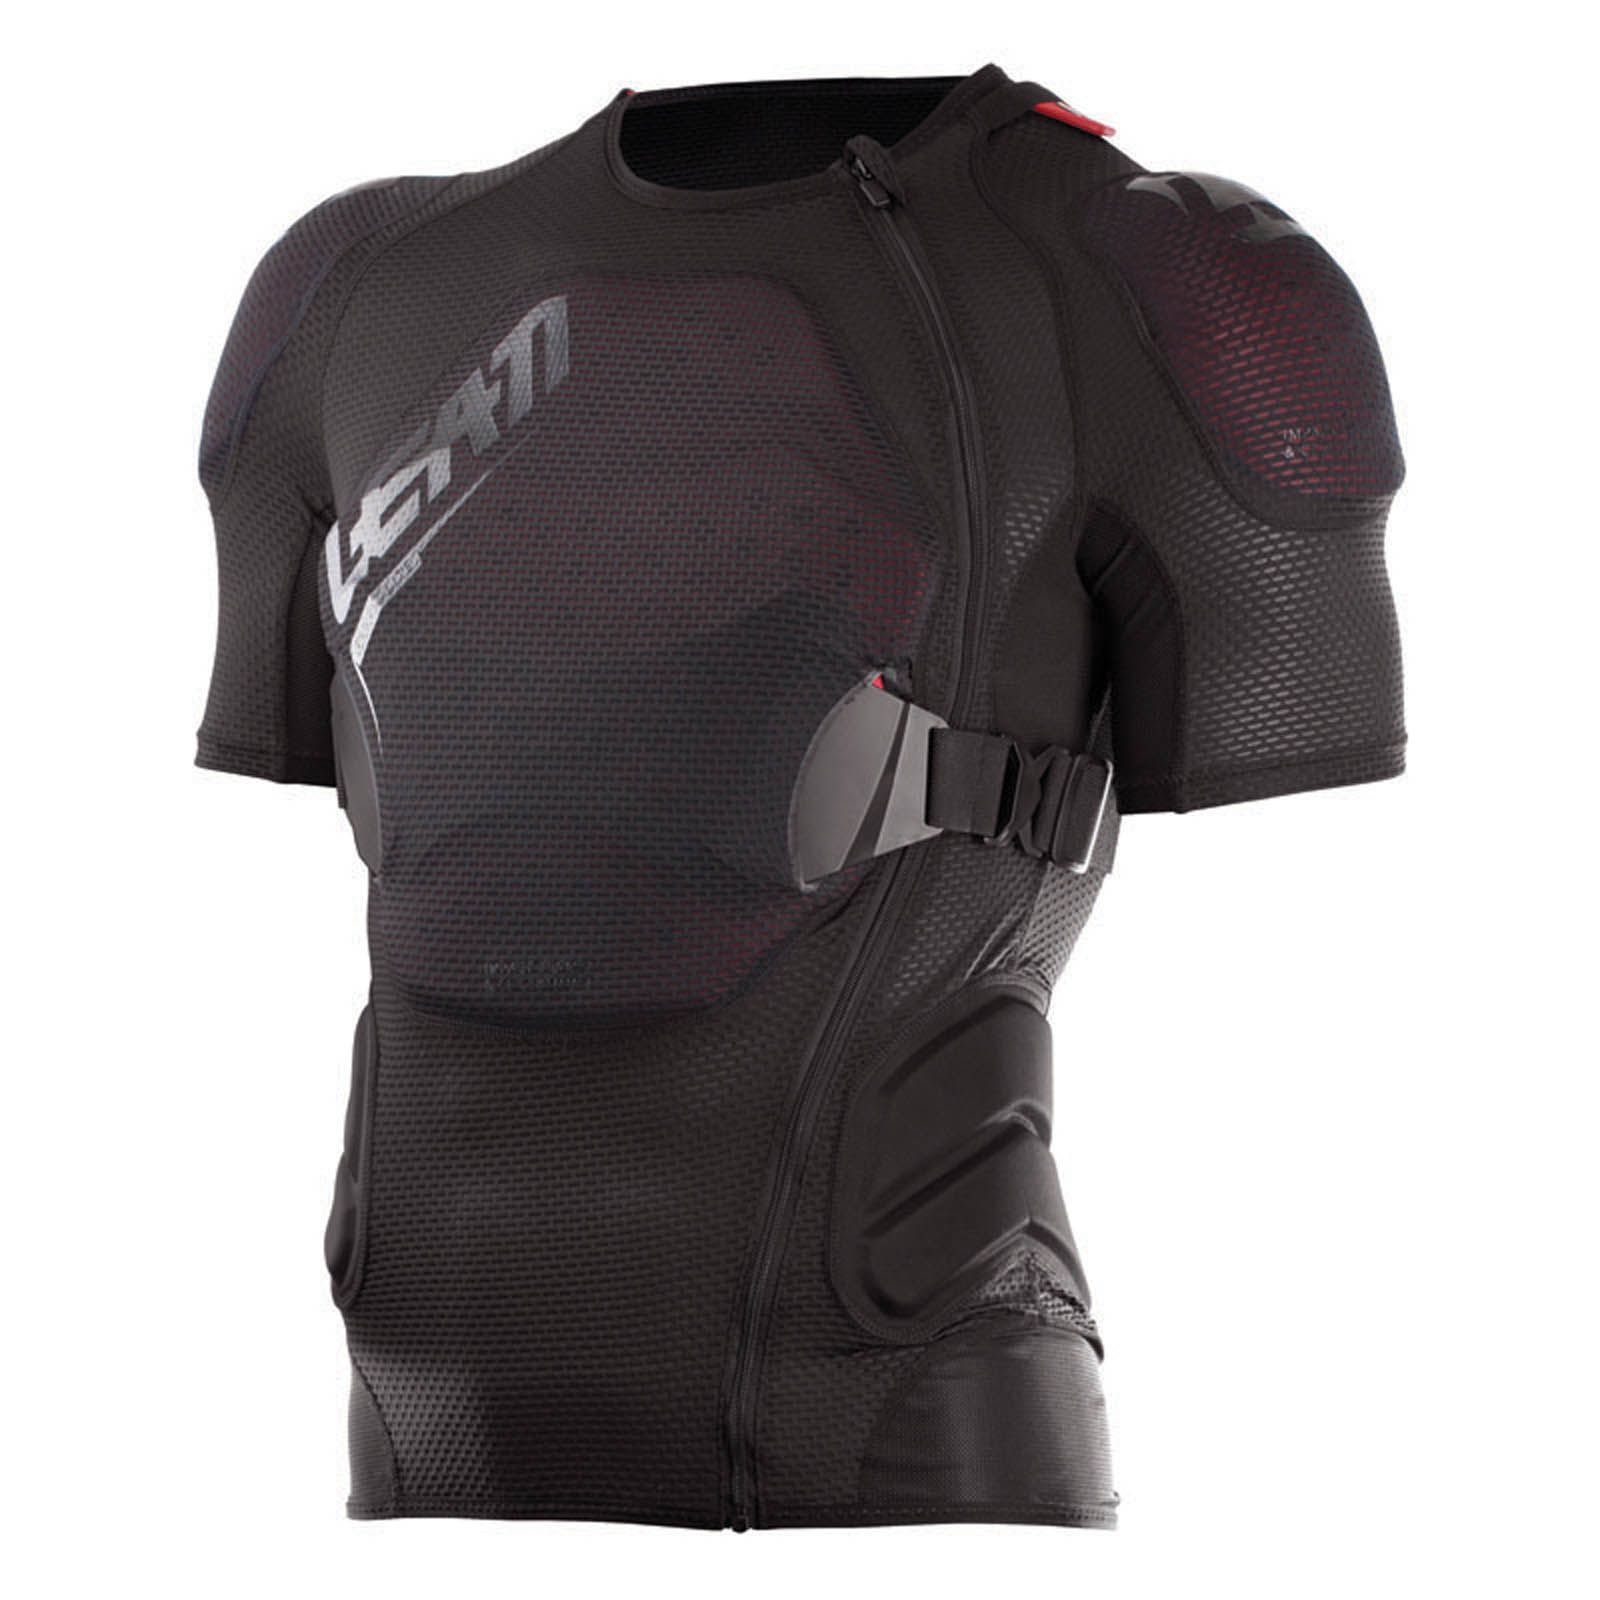 Leatt Body Tee 3Df Airfit Lite Sml/Med 160-172Cm | Tracktion Motorcycles